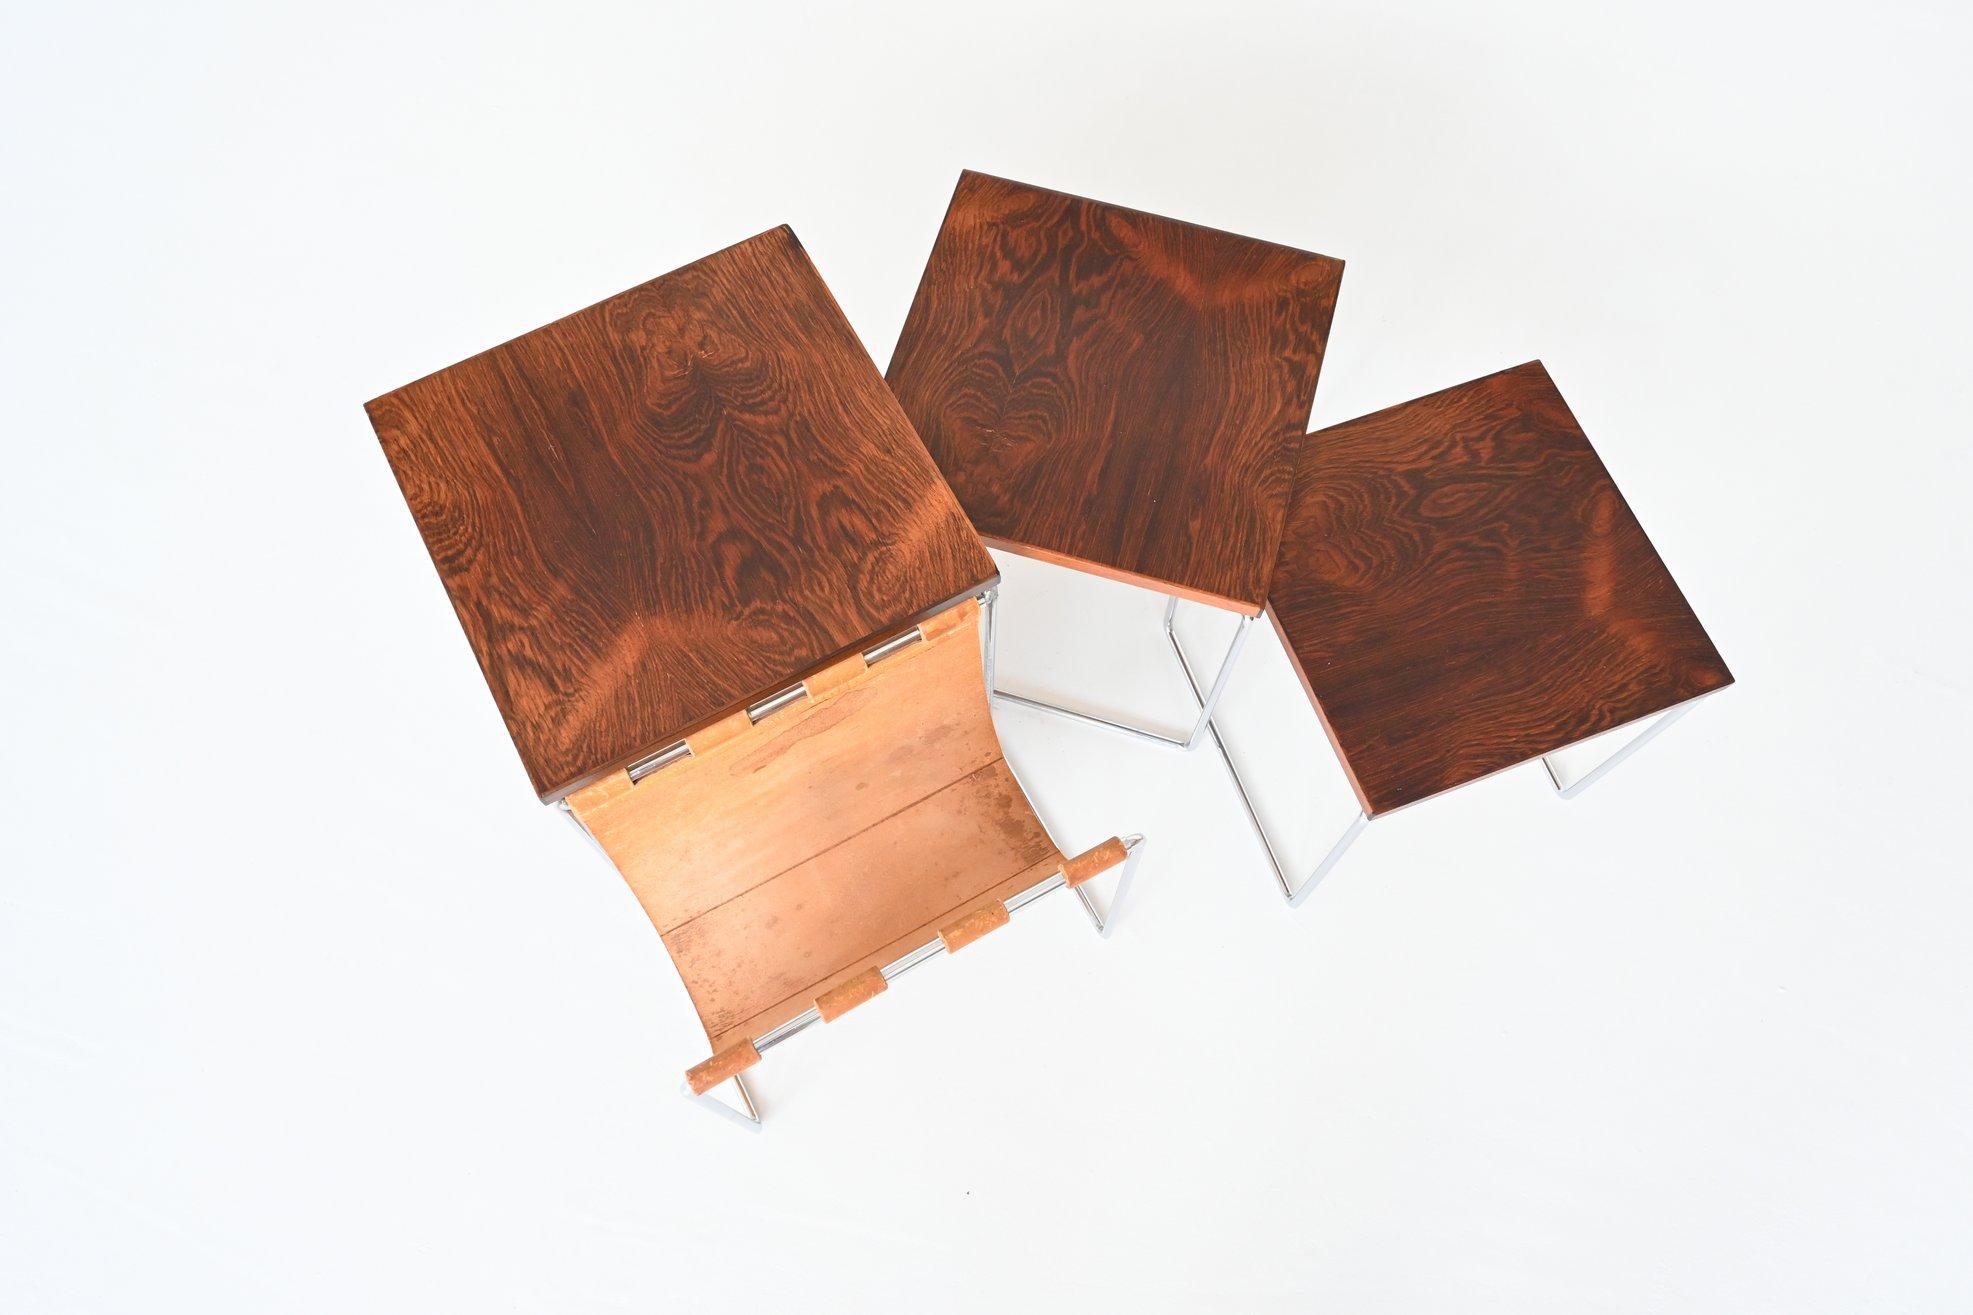 Beautiful set of three nesting tables by unknown designer or manufacturer, The Netherlands 1960. These tables have a chrome plated solid metal sled frame, nicely grained rosewood veneered top and a patinated natural saddle leather magazine basket.